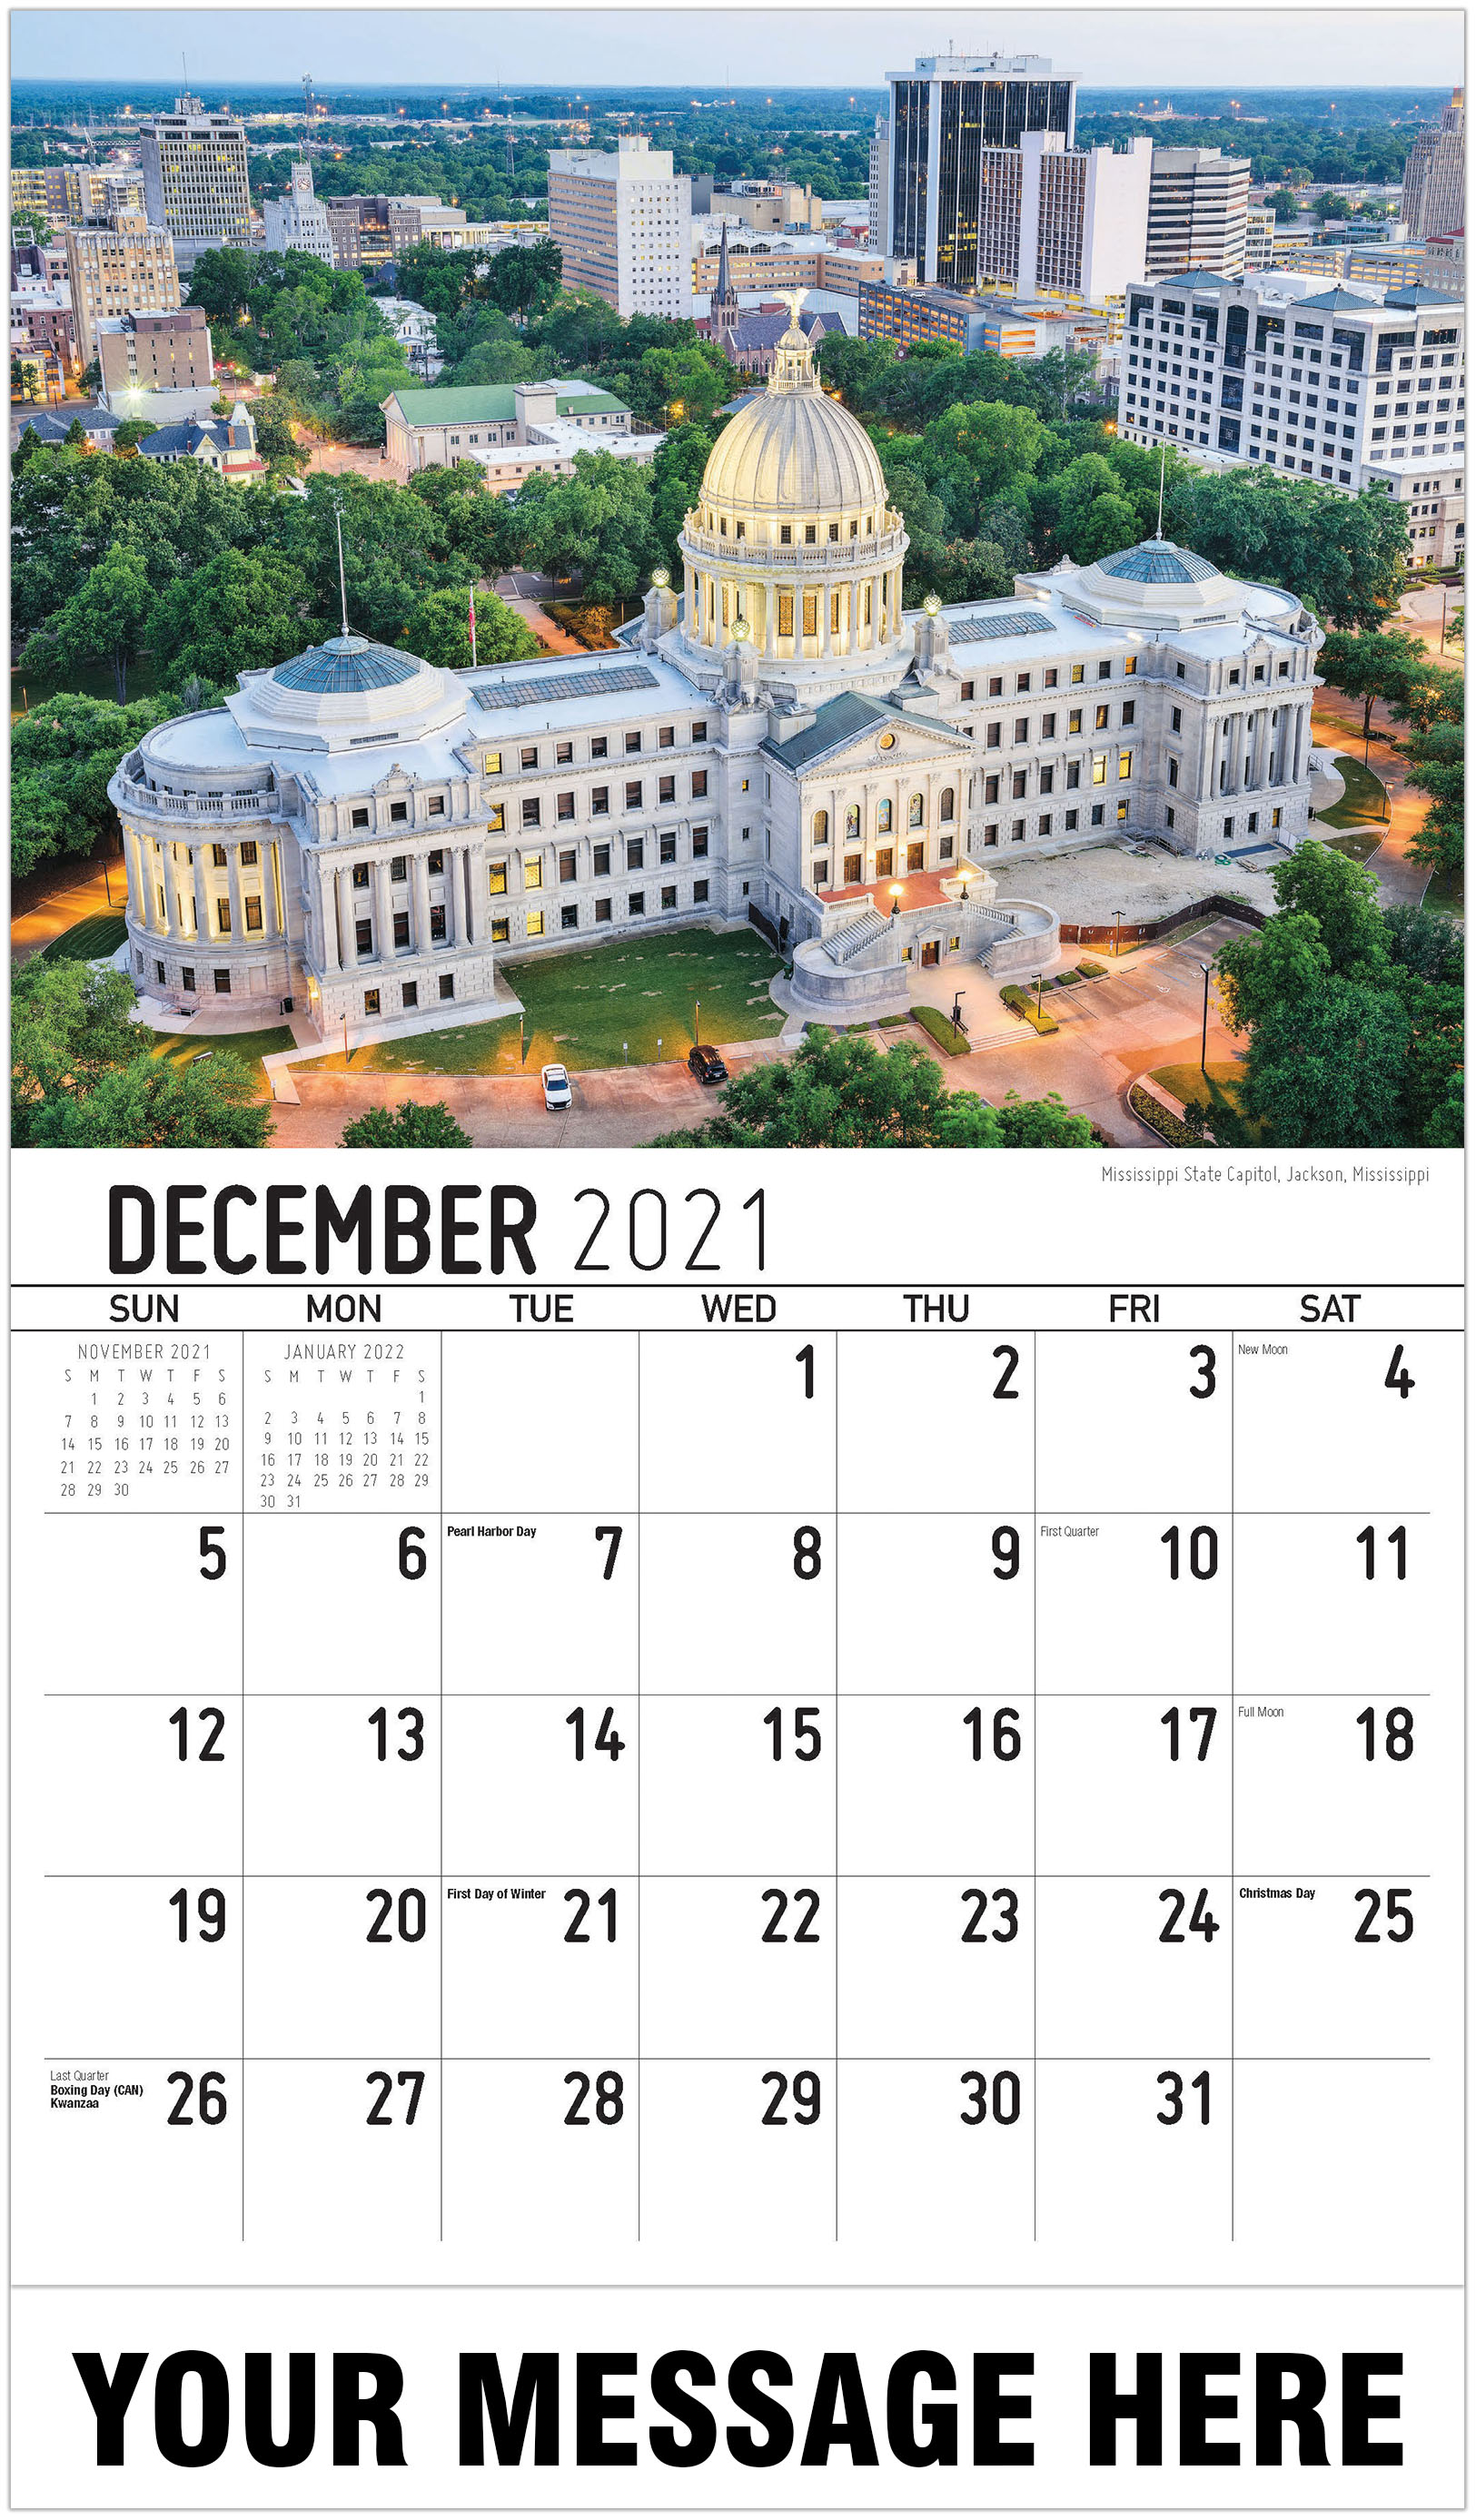 Mississippi State Calendar Customize and Print